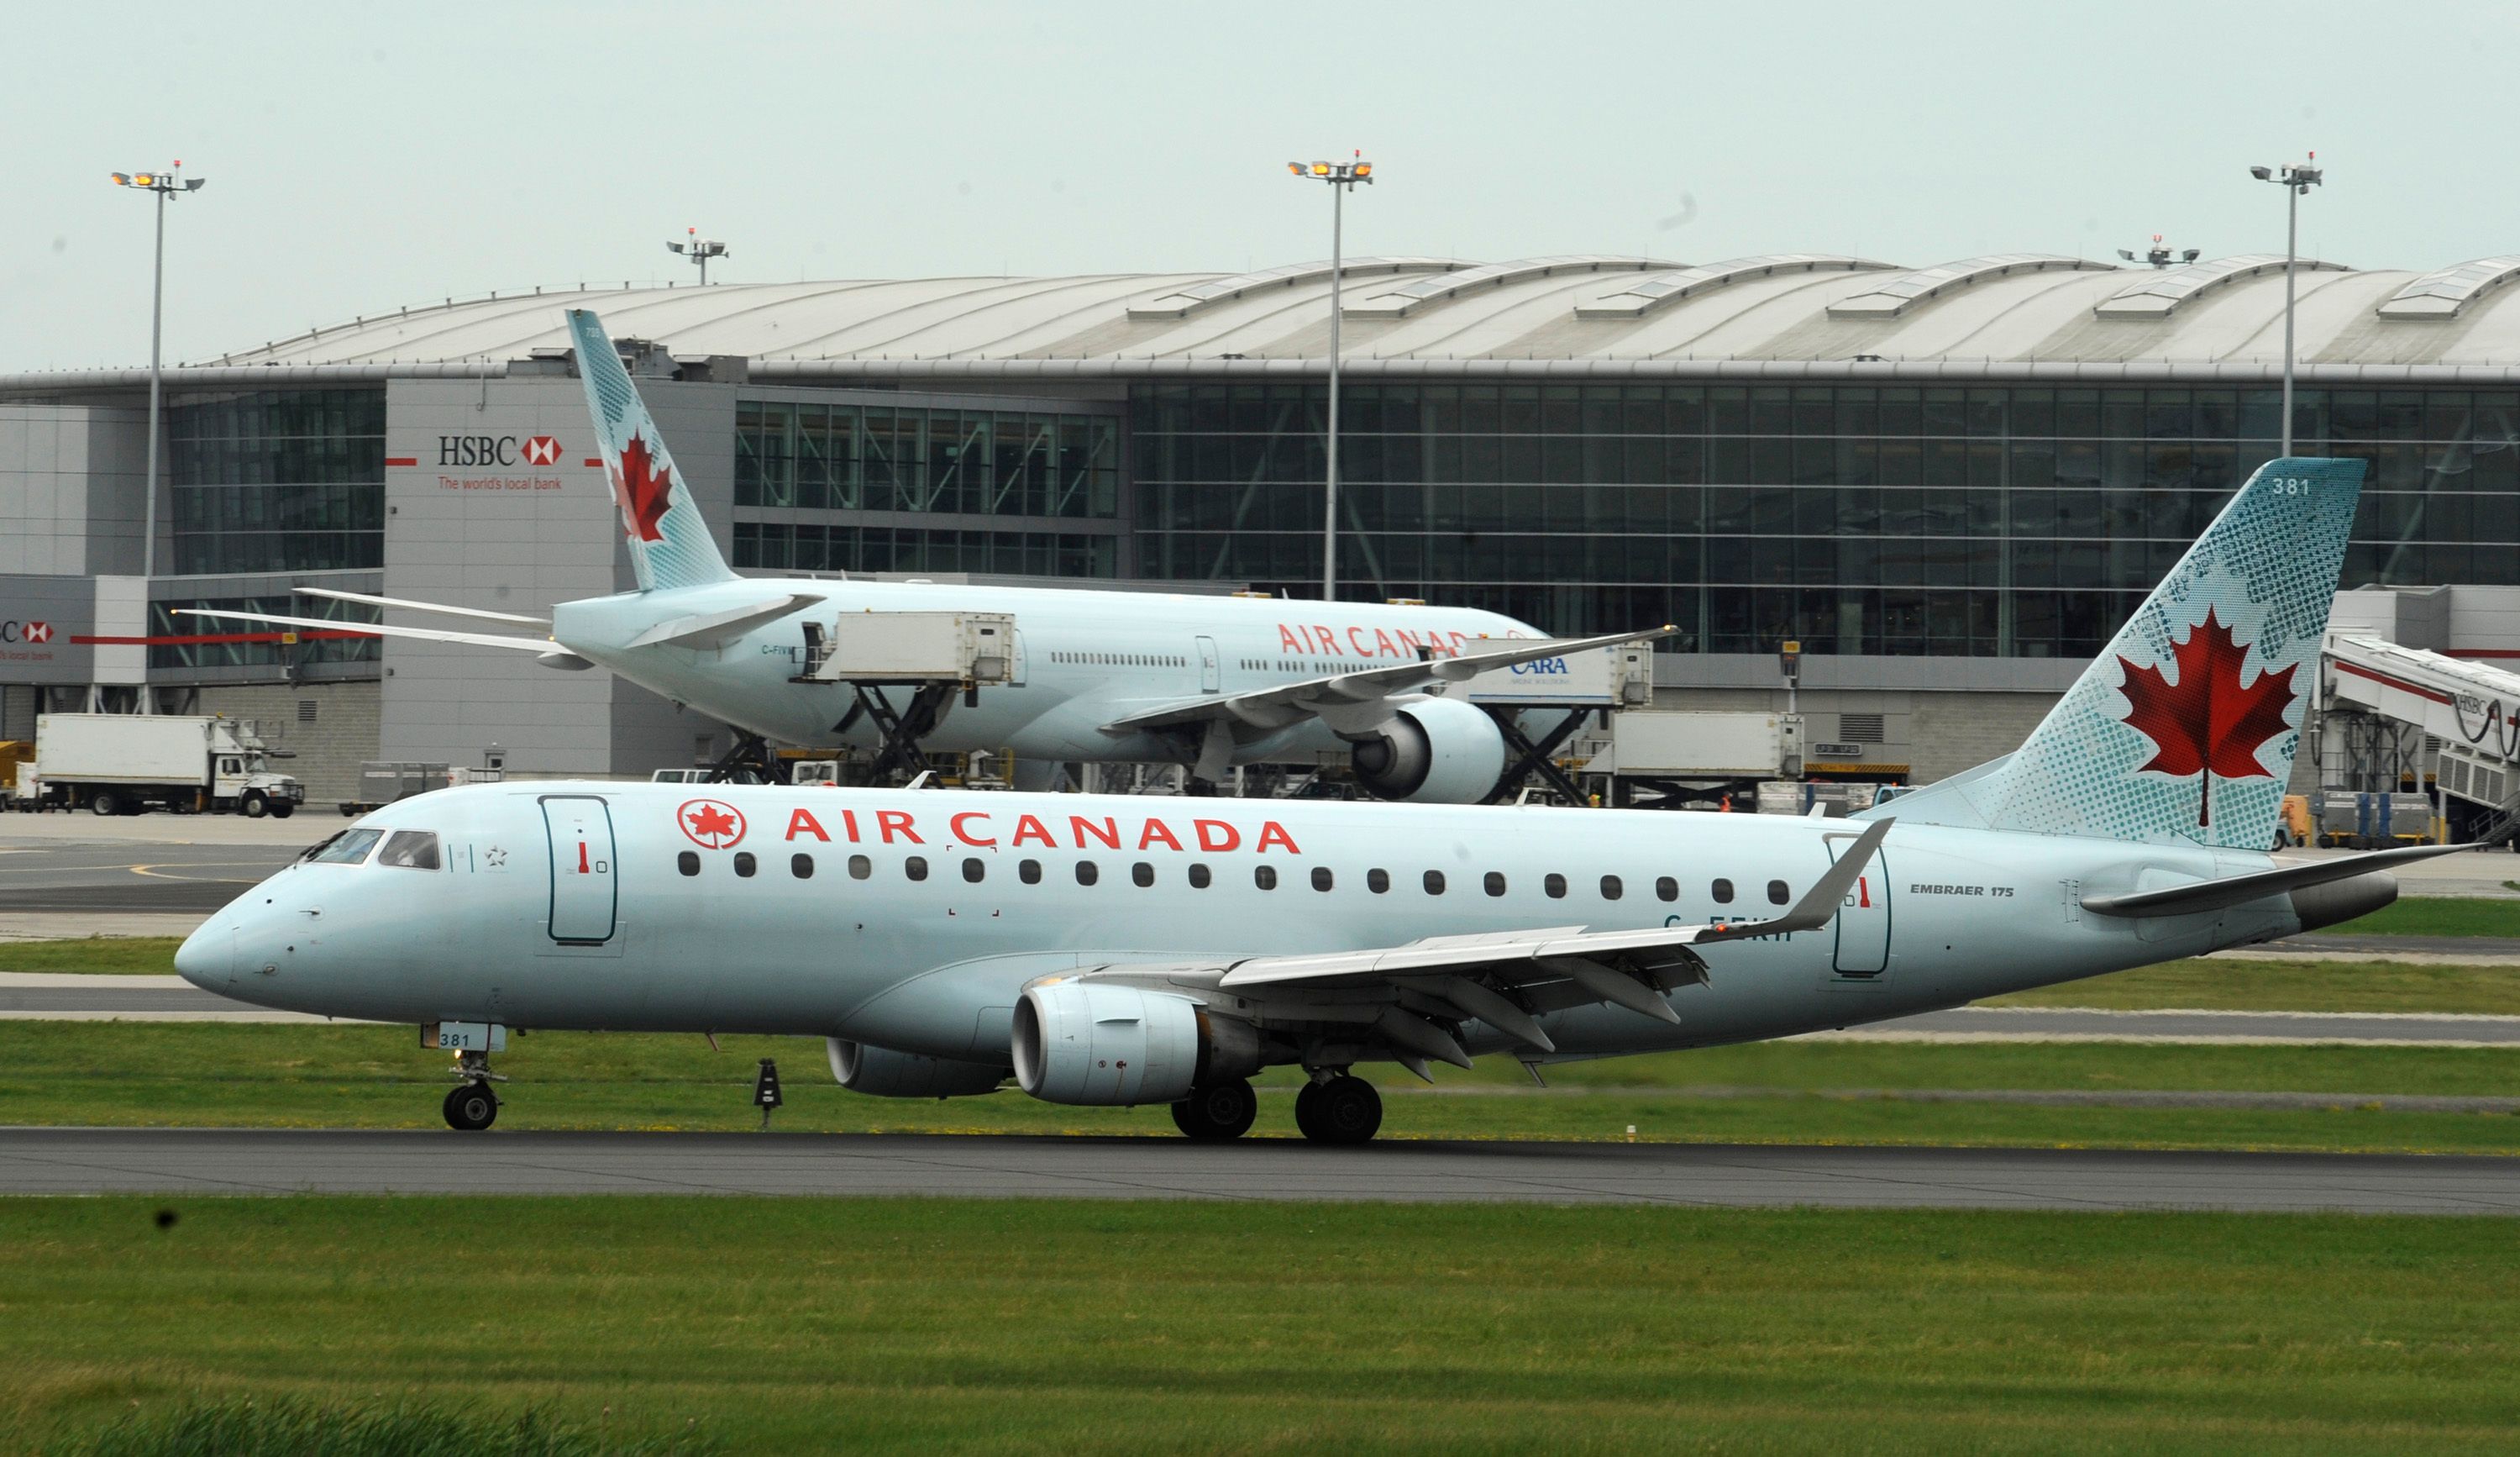 Air Canada Embraer E175 on ramp at Toronto Airport